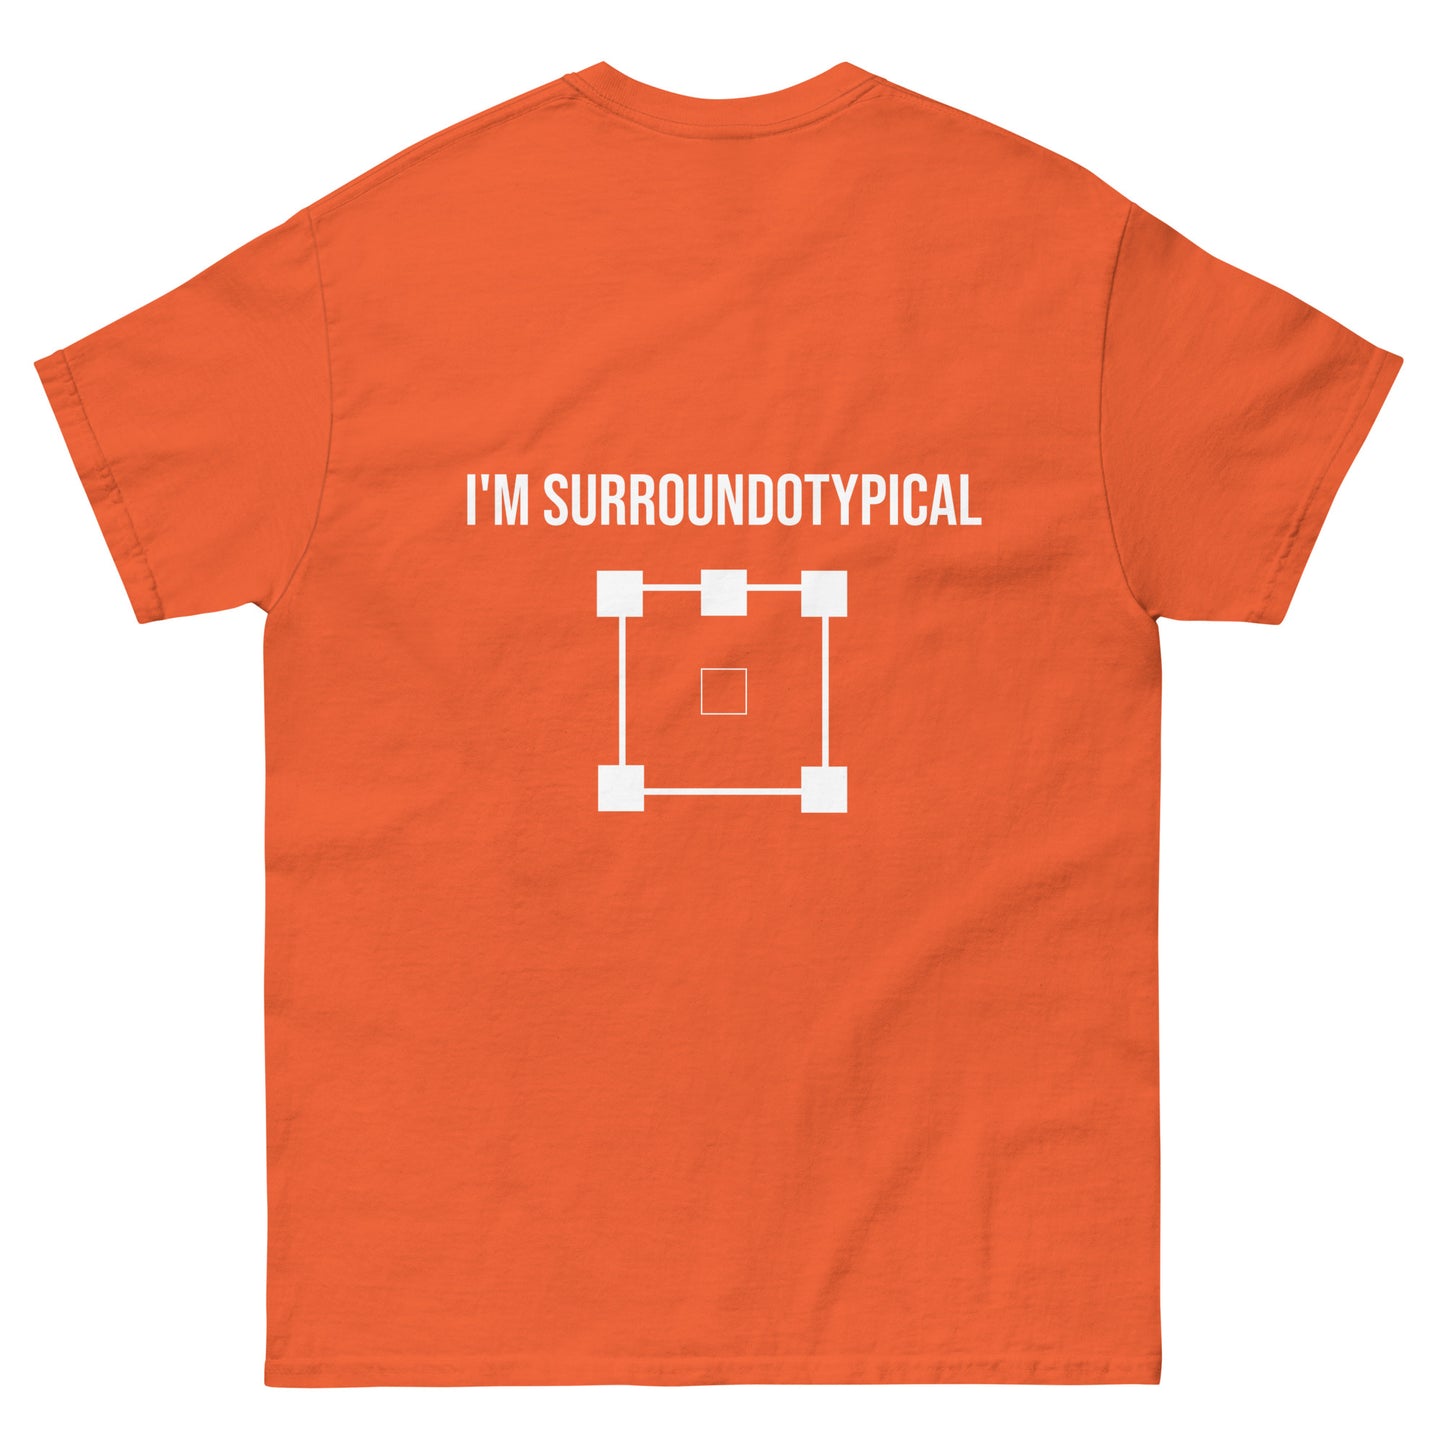 I'm not stereotypical. I'm surroundotypical. Classic tee